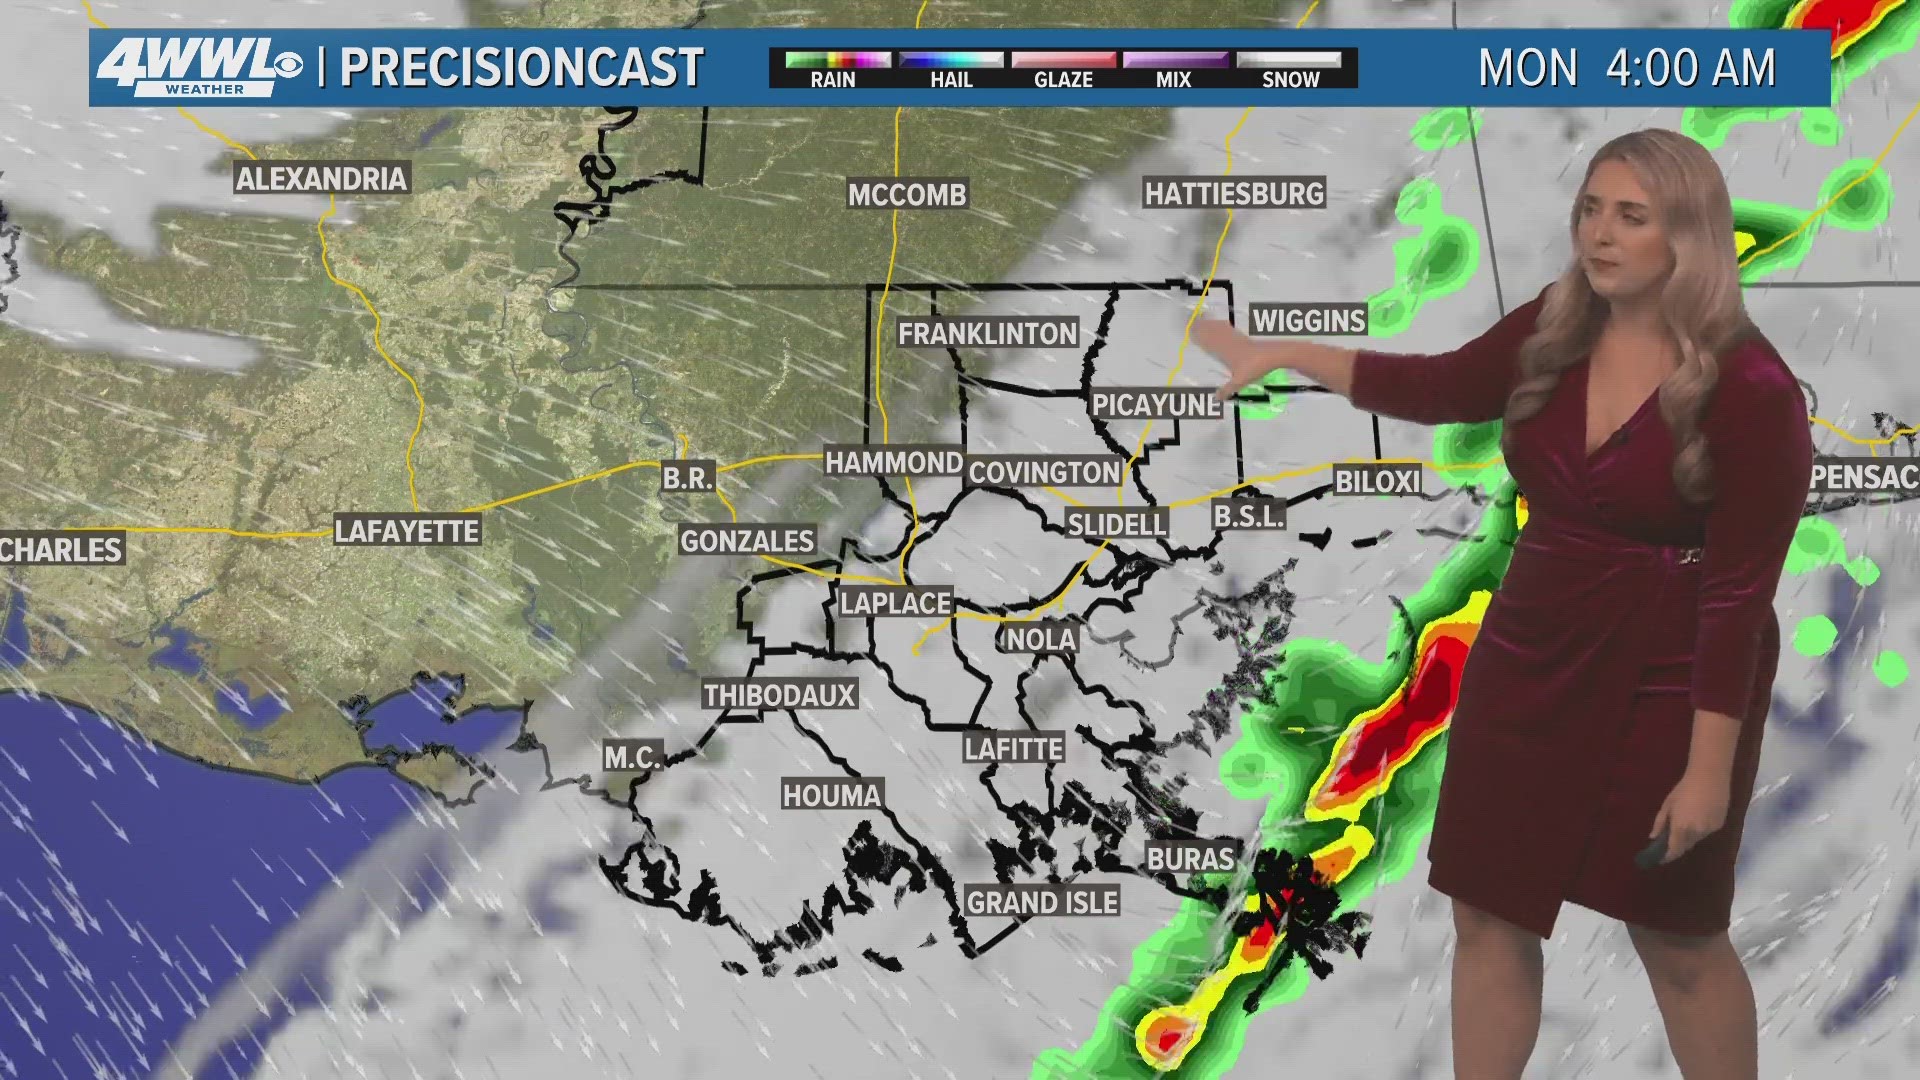 WWL meteorologist Alexa Trischler gives a breakdown of what to expect Saturday and Sunday.